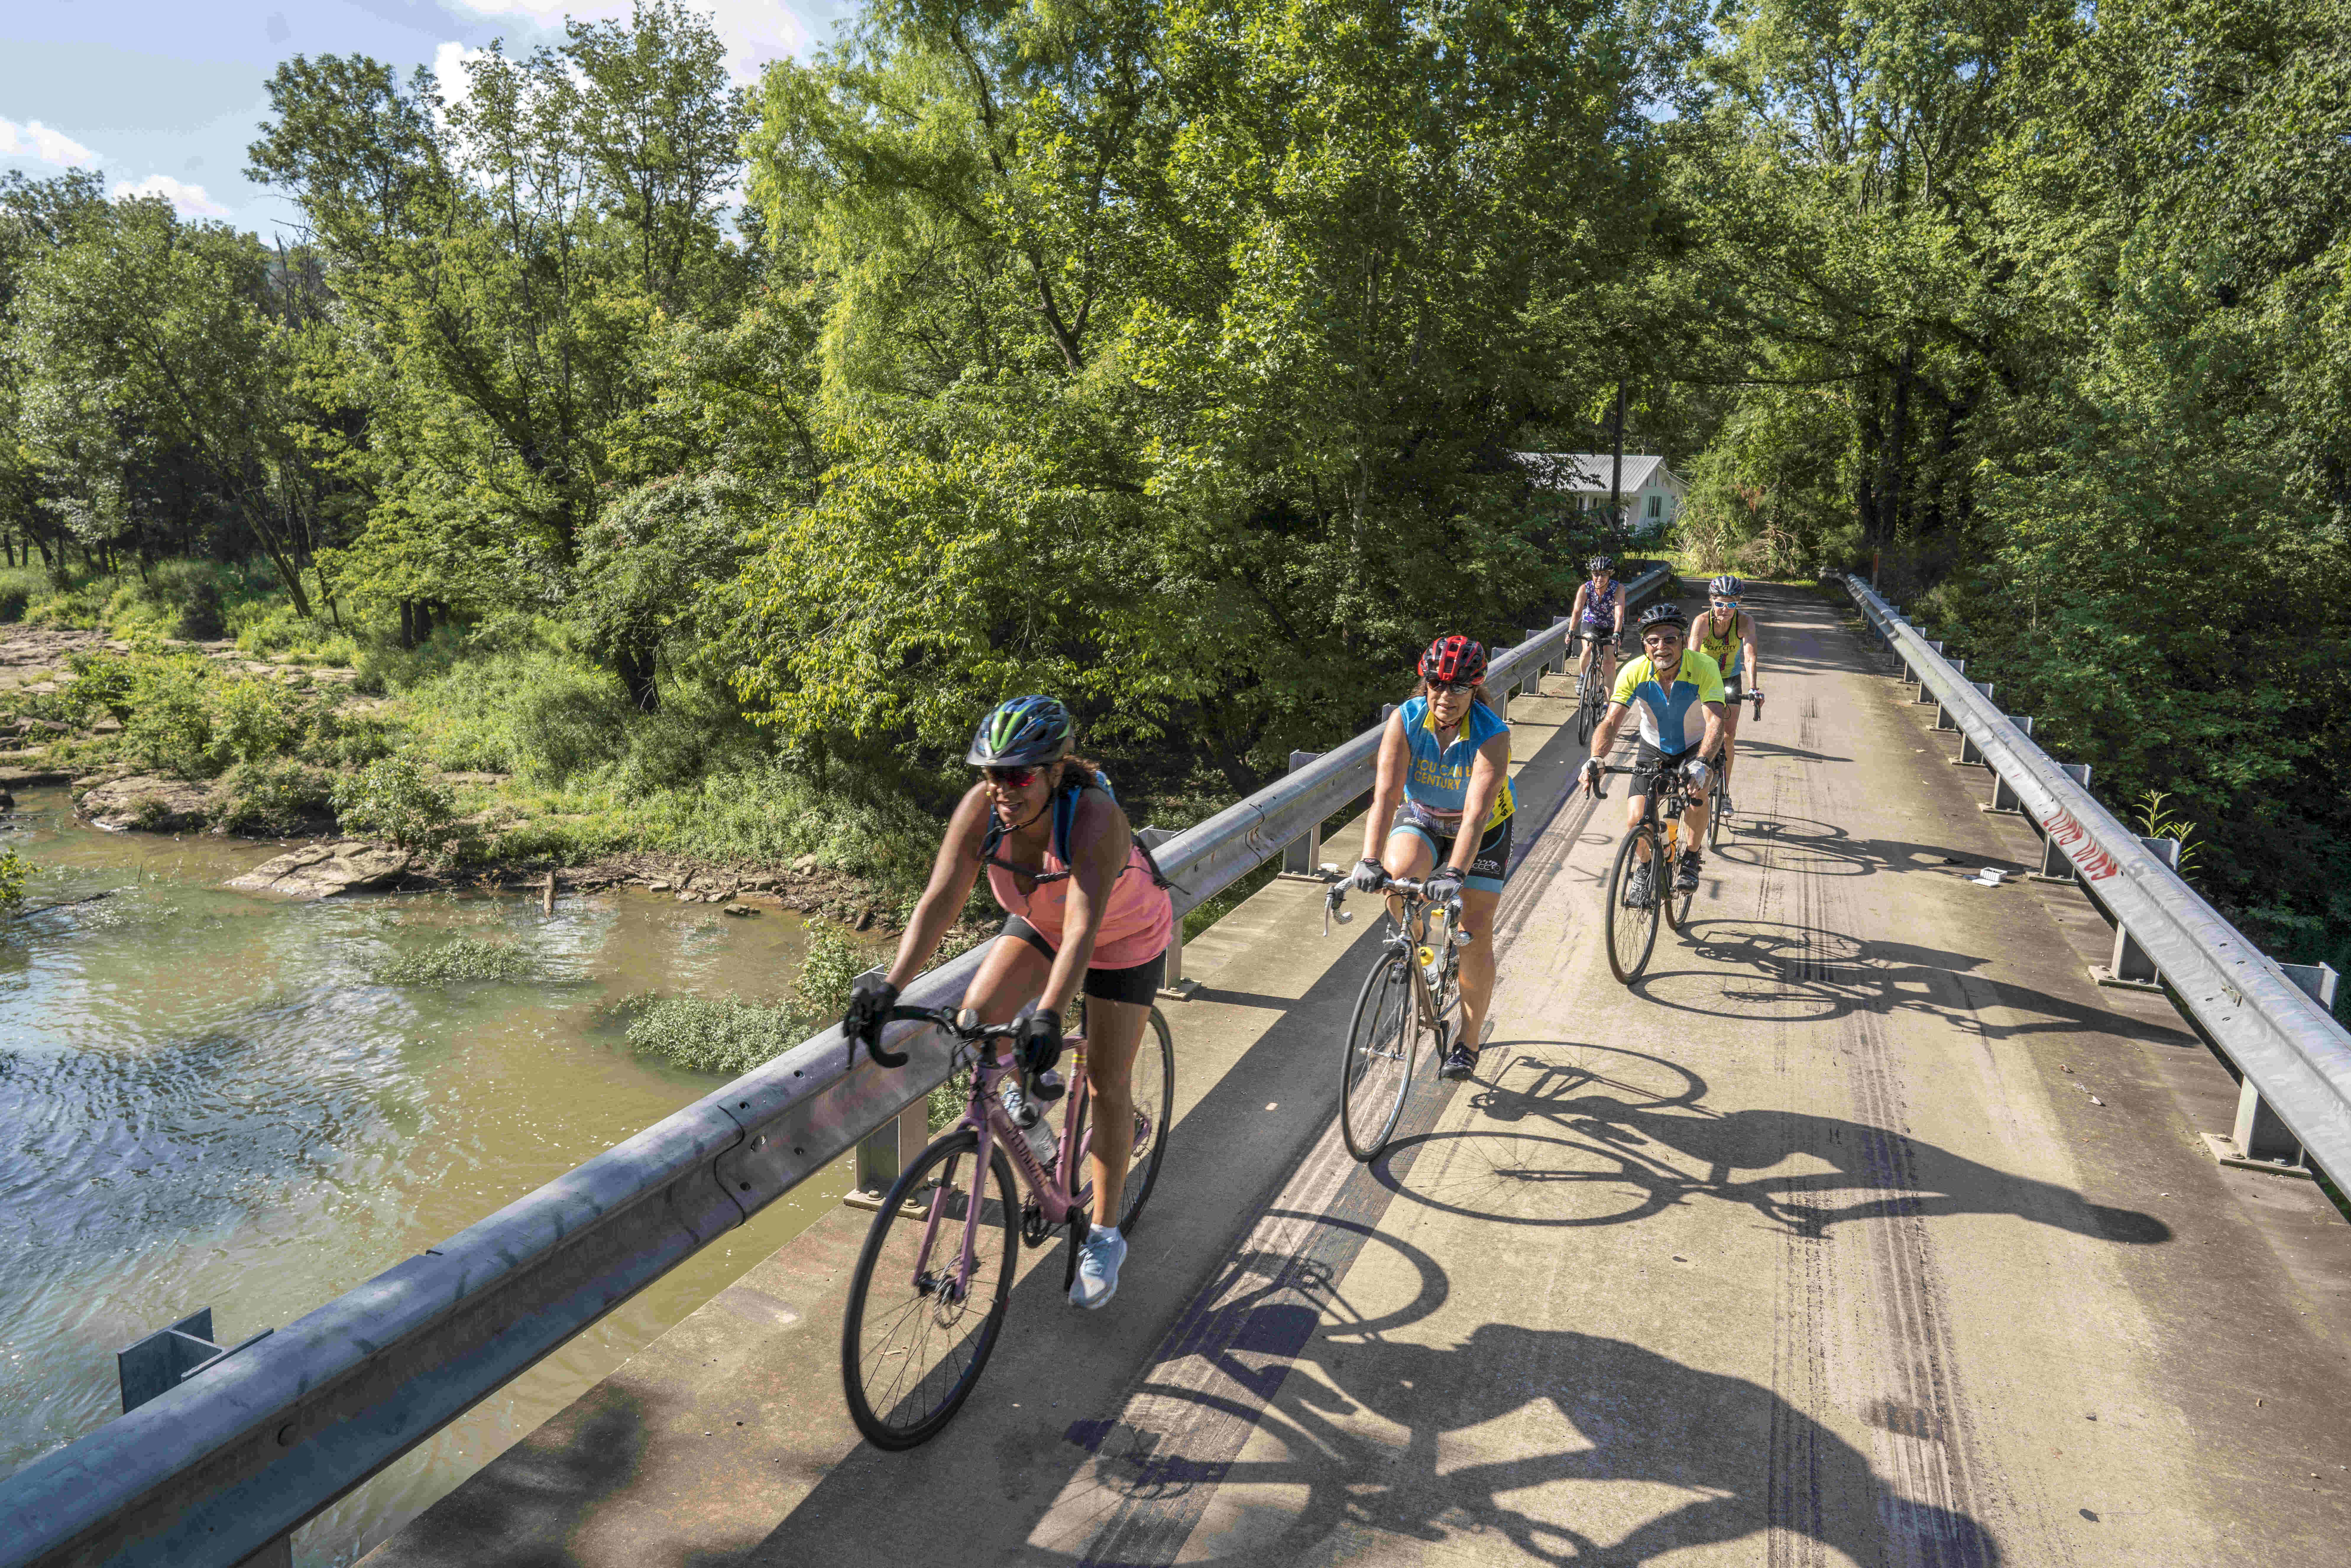 Bikers ride along path above waterway in Grant, Alabama.